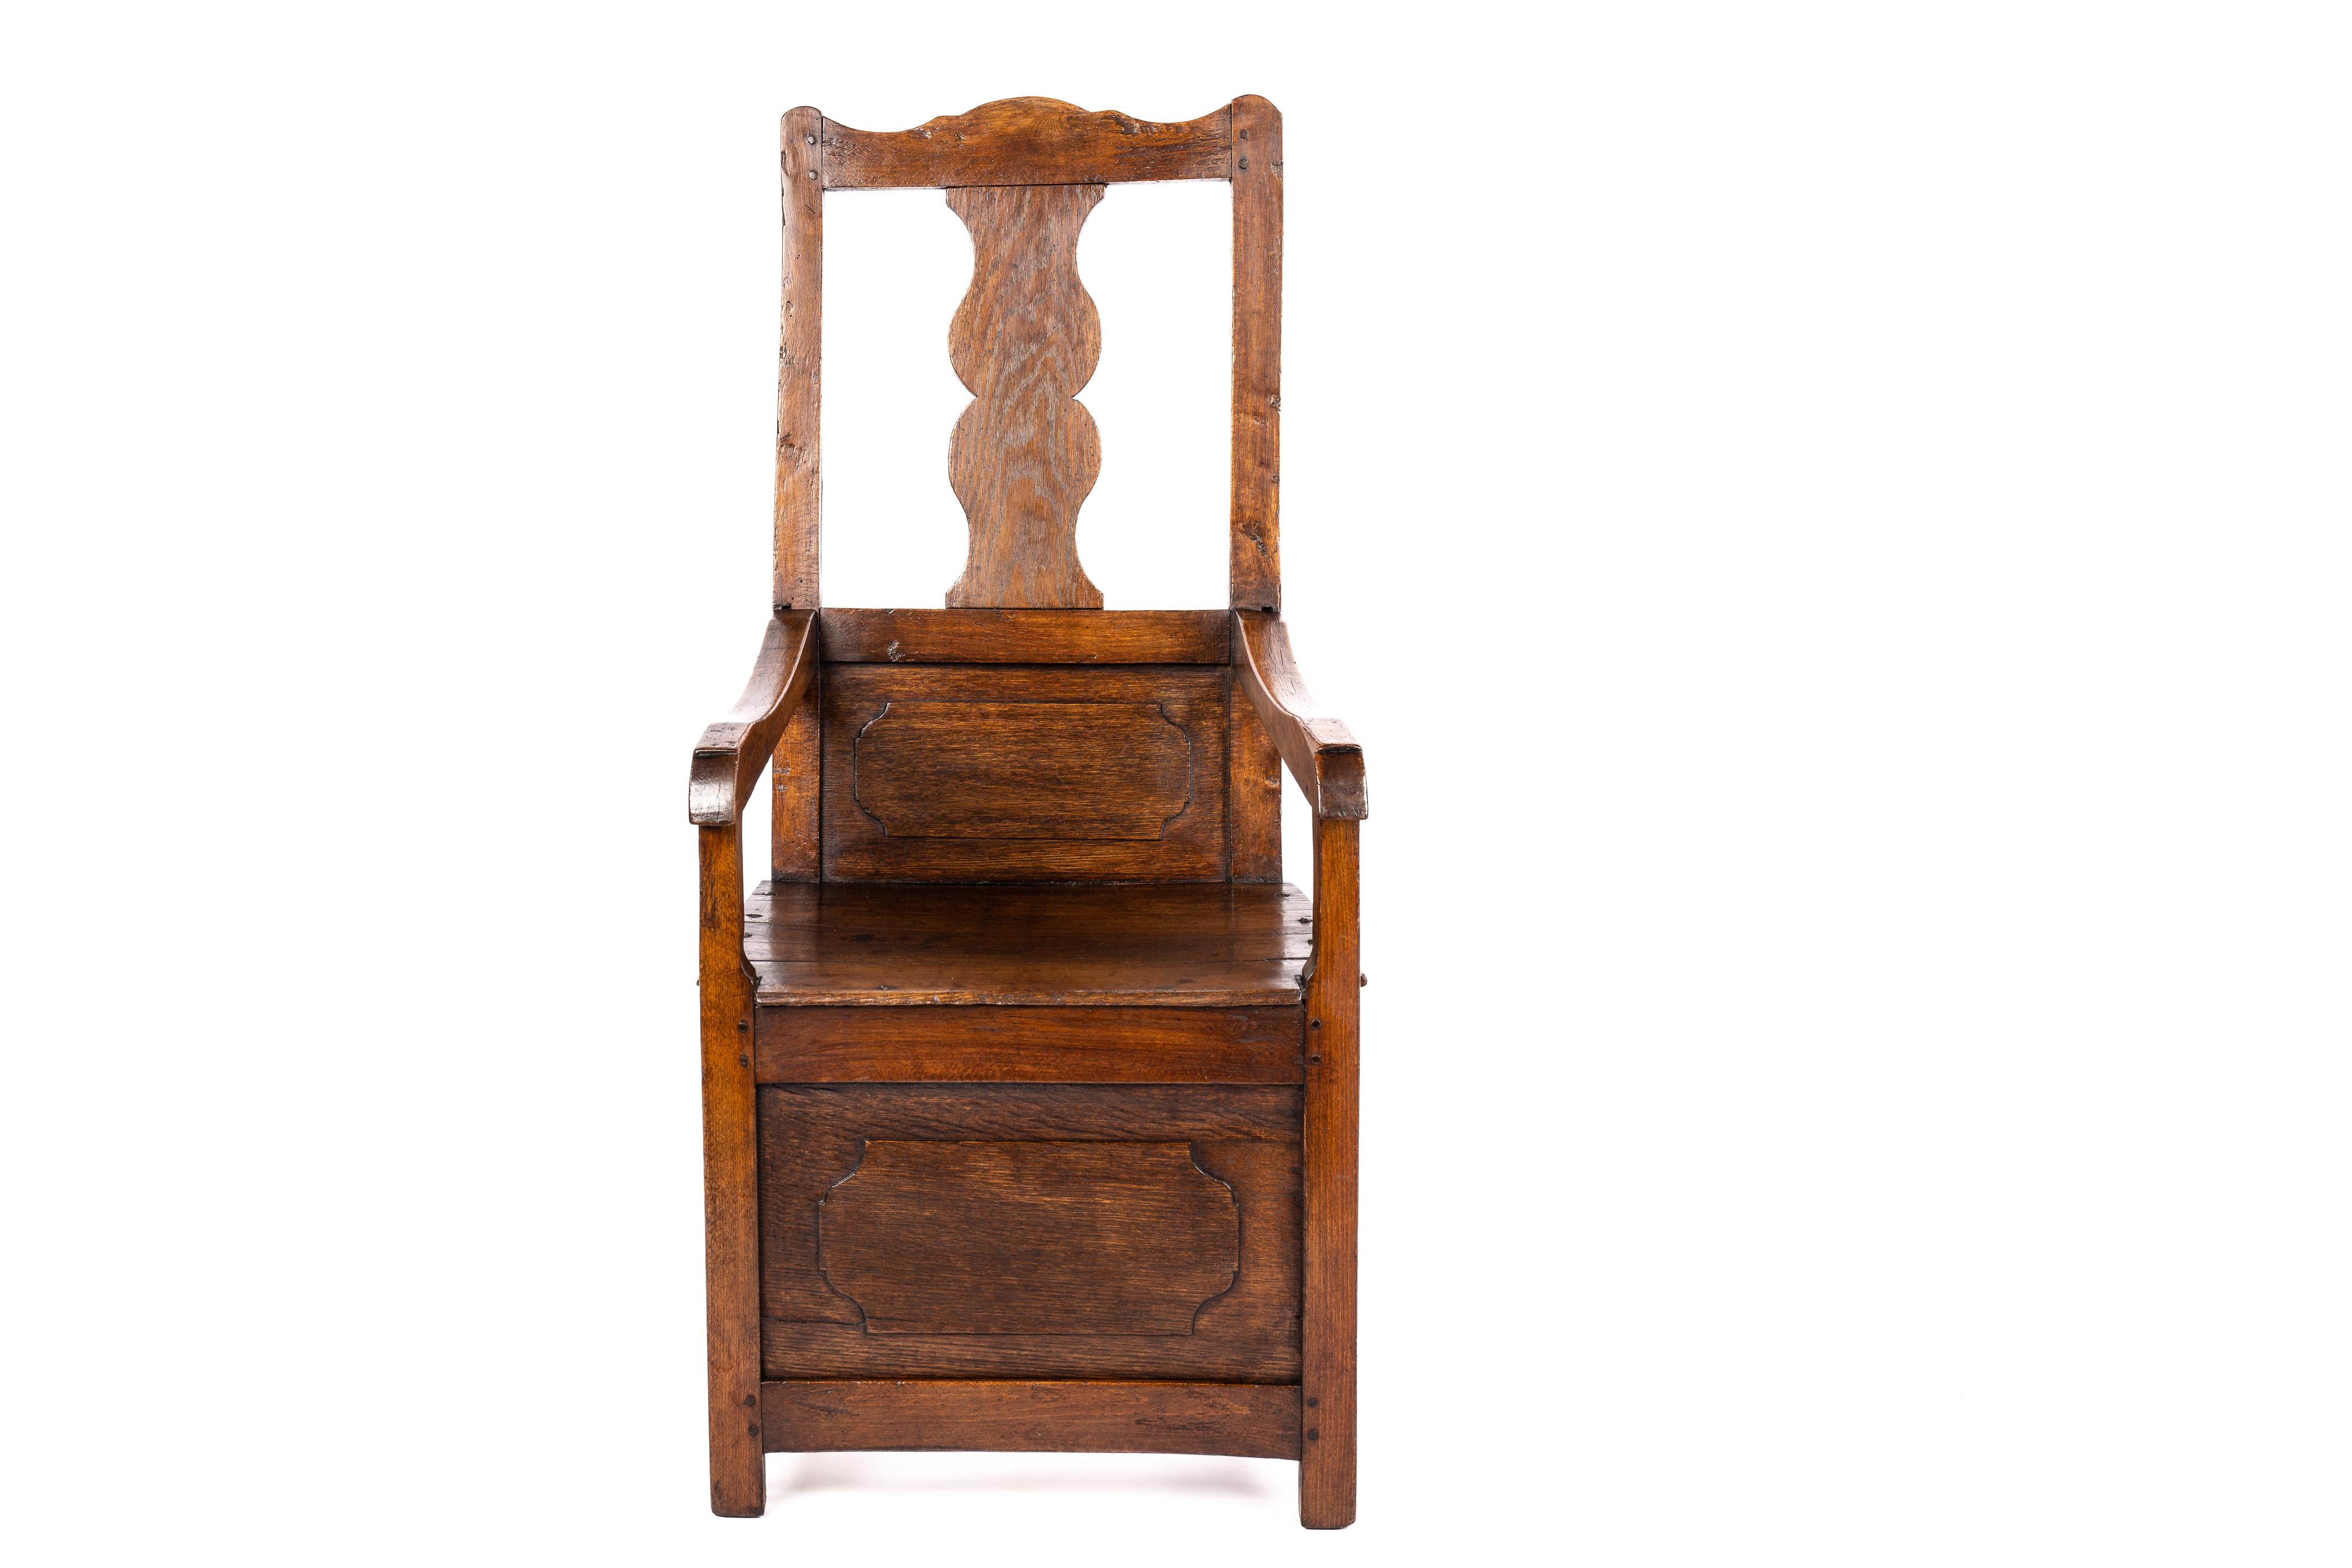 On offer here is a beautiful antique armchair, a true testament to timeless beauty and craftsmanship. This remarkable piece boasts wide armrests and a paneled backrest and front, making this a fine example of the Dutch 